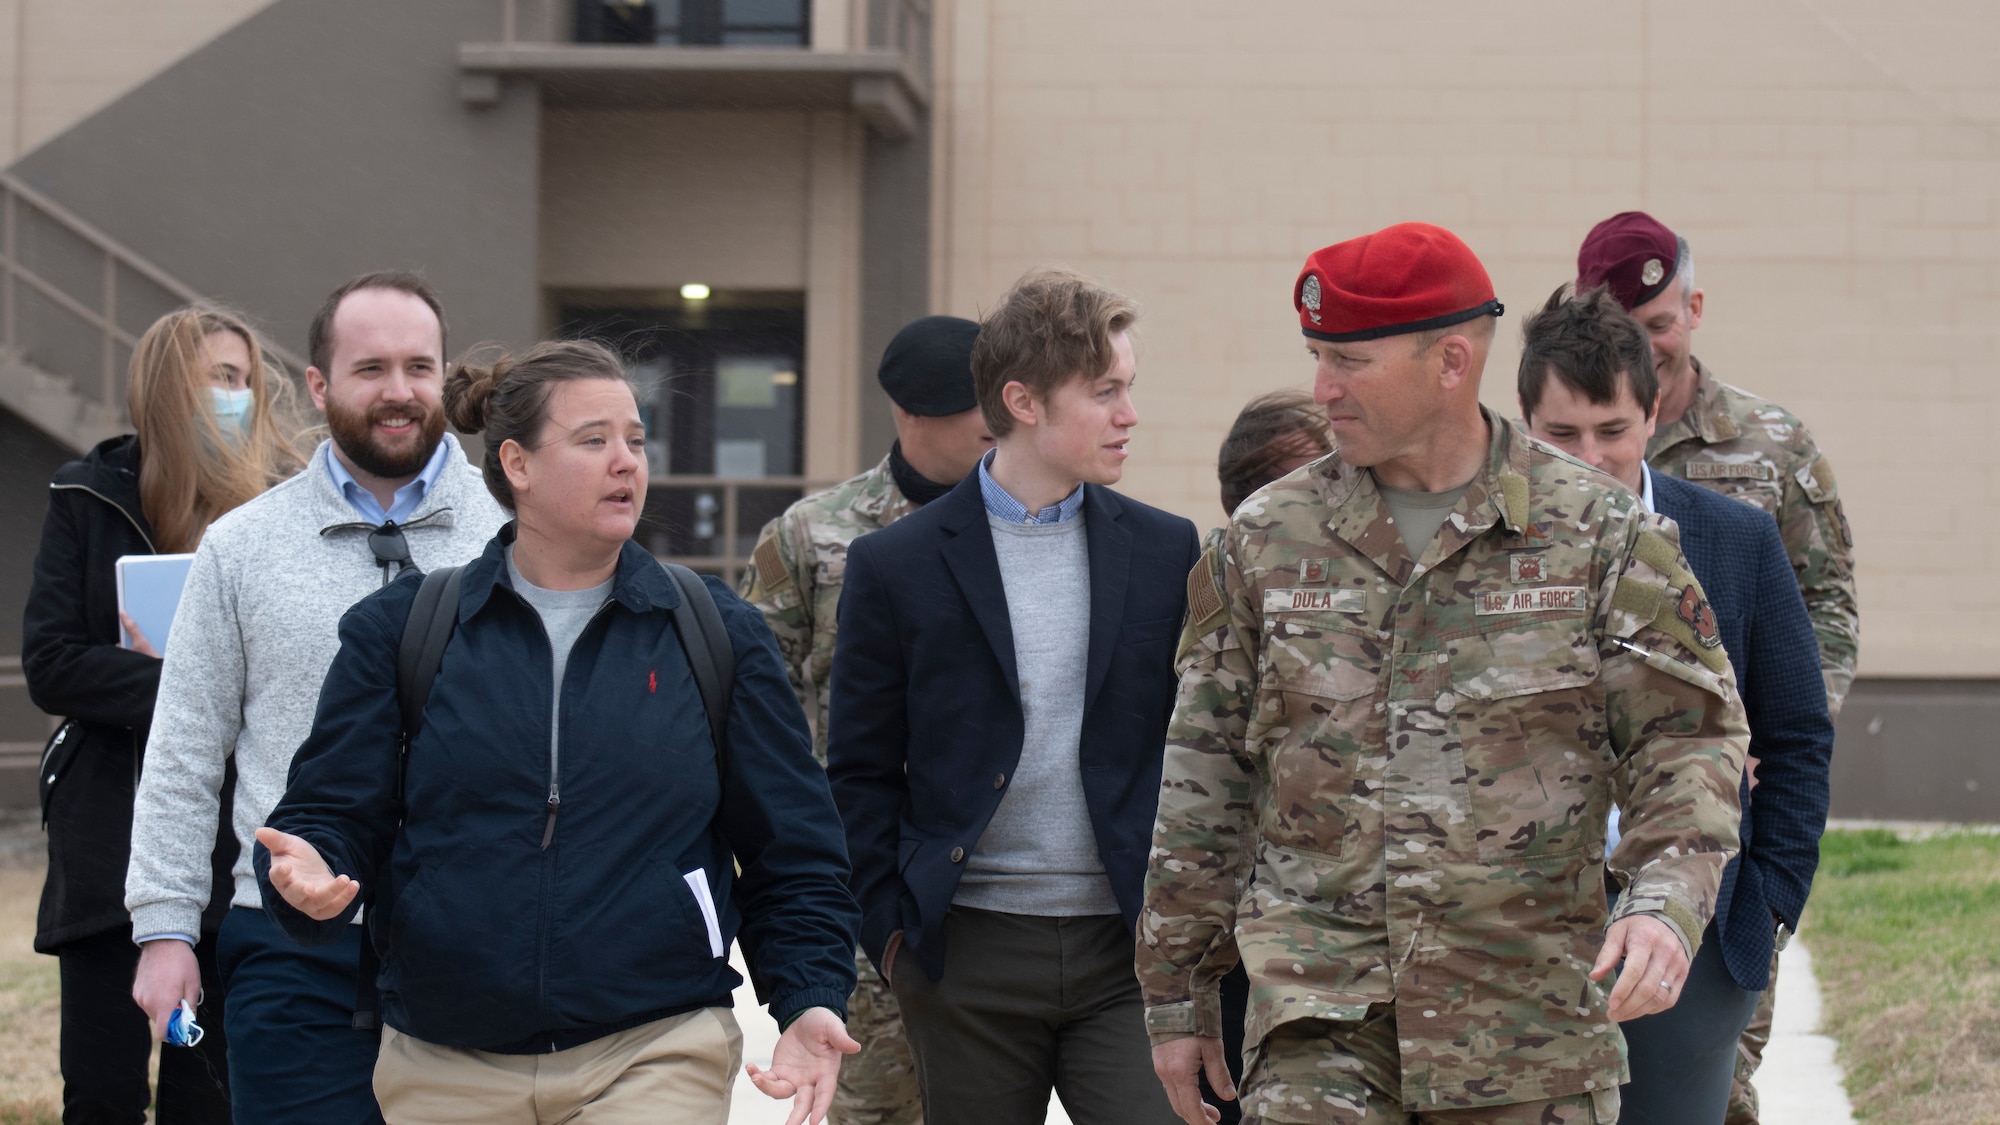 Col. Mason Dula (right), Special Warfare Training Wing commander, speaks with Technical Sgt. Amber Swearengin (left), Secretary of the Air Force Legislative Liaison during a tour of the Special Warfare Training Wing’s facilities on Joint Base San Antonio-Chapman Training Annex, Texas, Feb. 23, 2022. A delegation of U.S. Senate staff members visited the SWTW to learn more about Air Force Special Warfare and the unique capabilities AFSPECWAR operators bring to the battlefield.